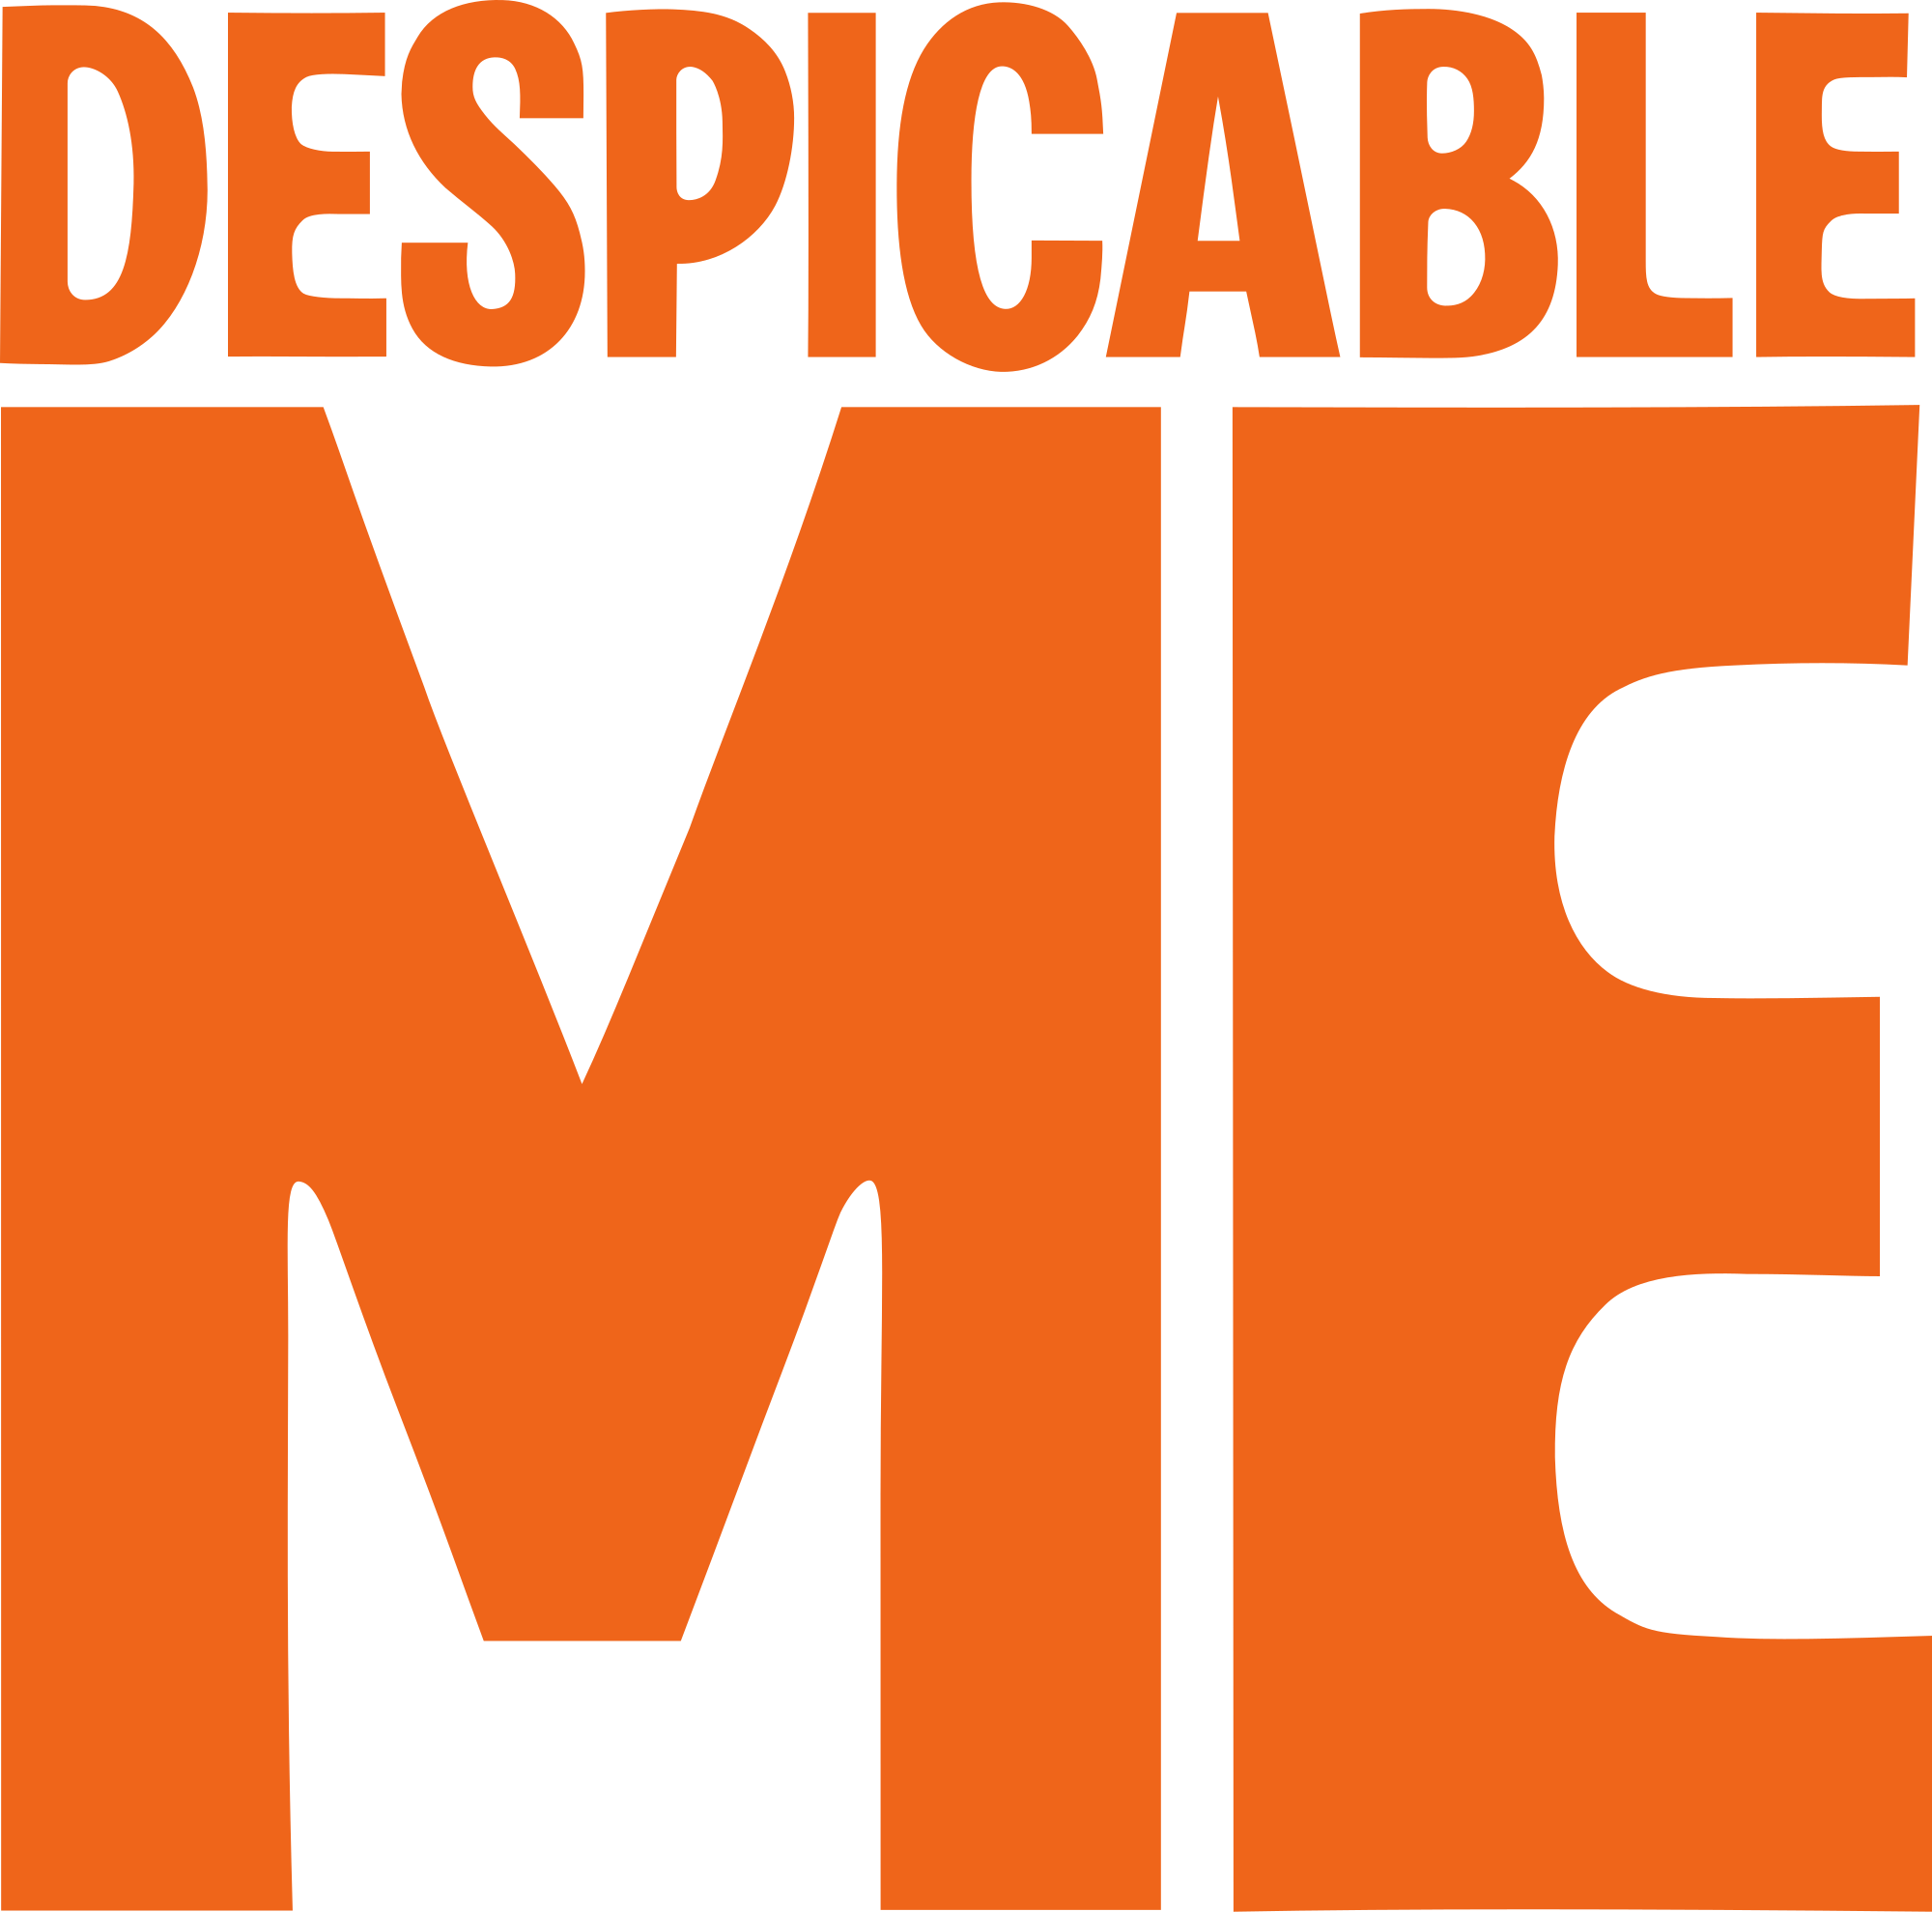 Despicable Me (franchise) - Wikipedia